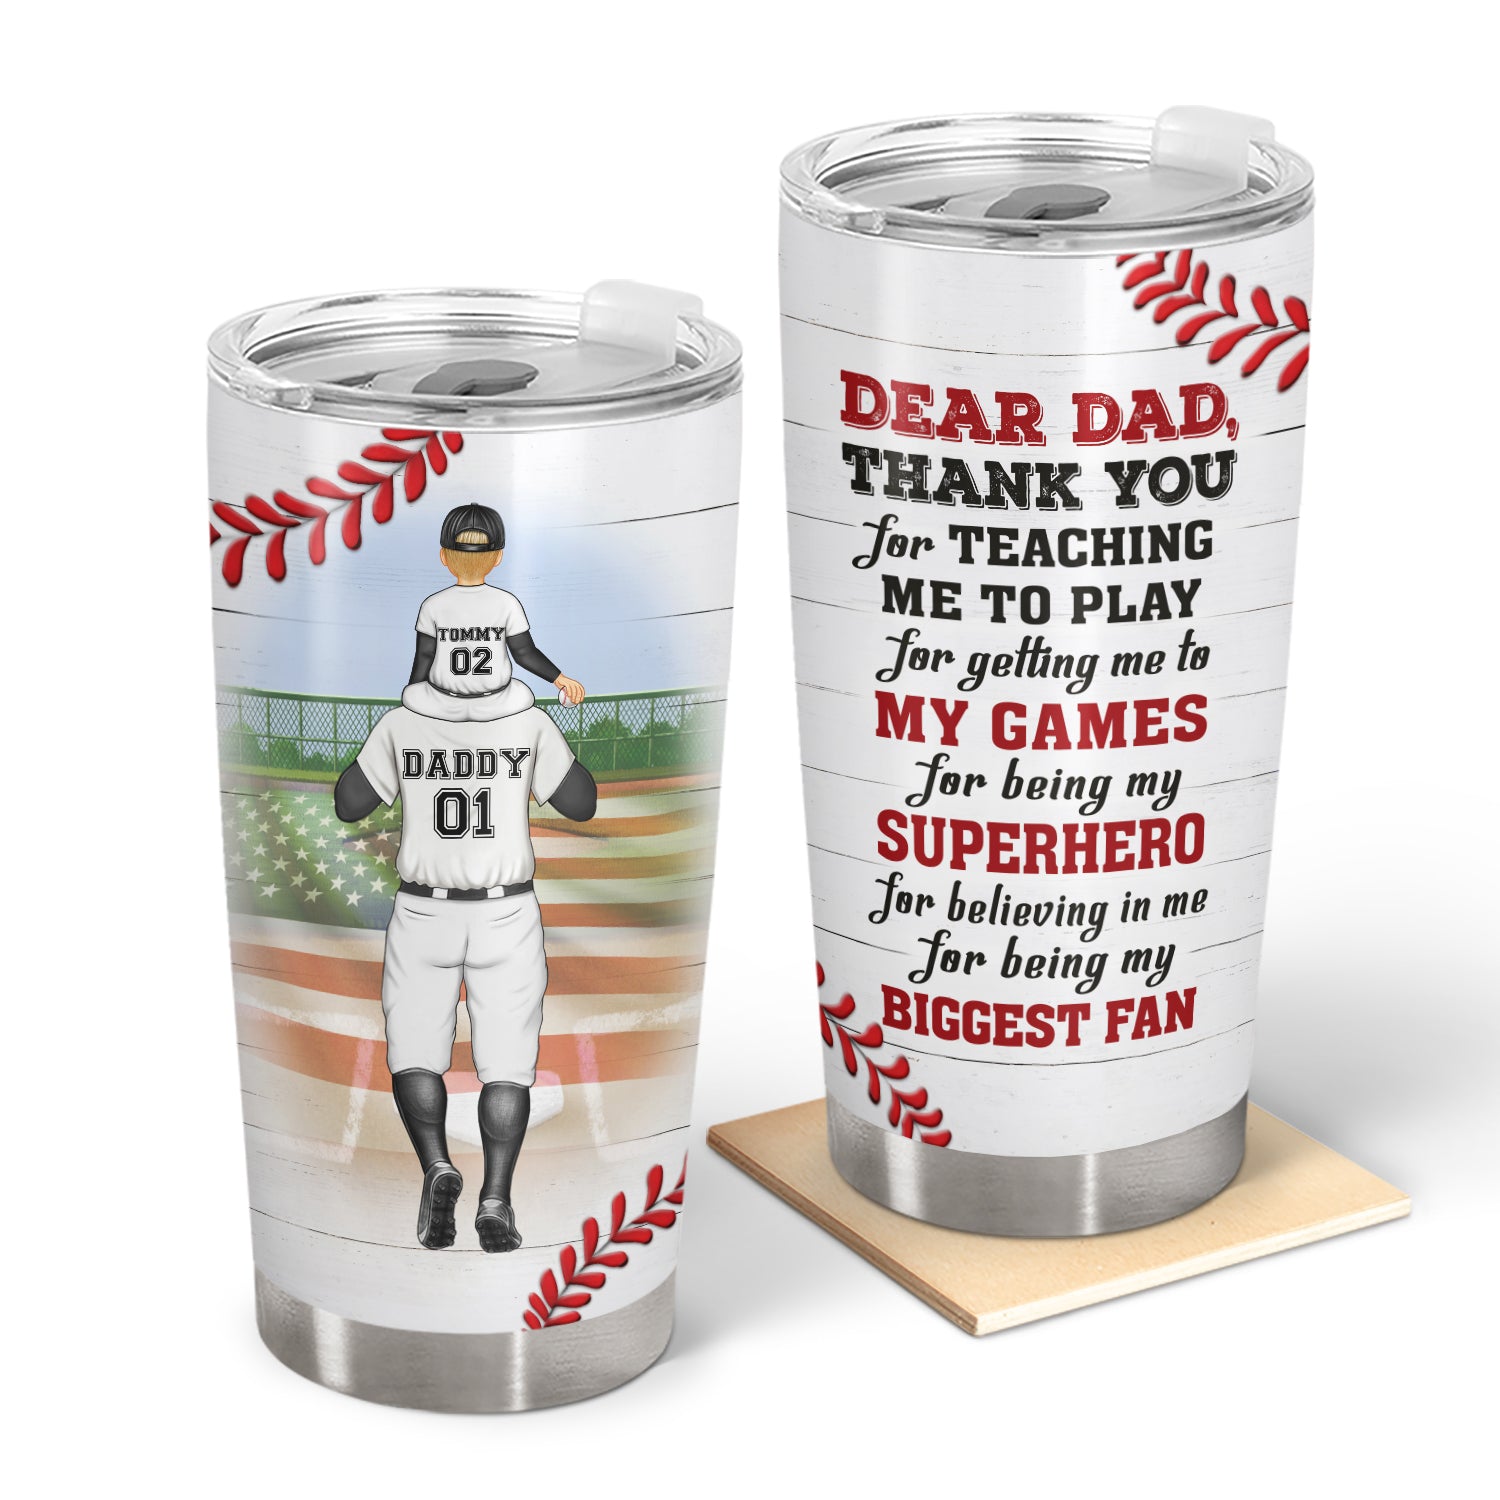 Dear Dad Thank You For Teaching Me - Birthday, Loving Gift For Baseball, Softball Fan, Father - Personalized Tumbler